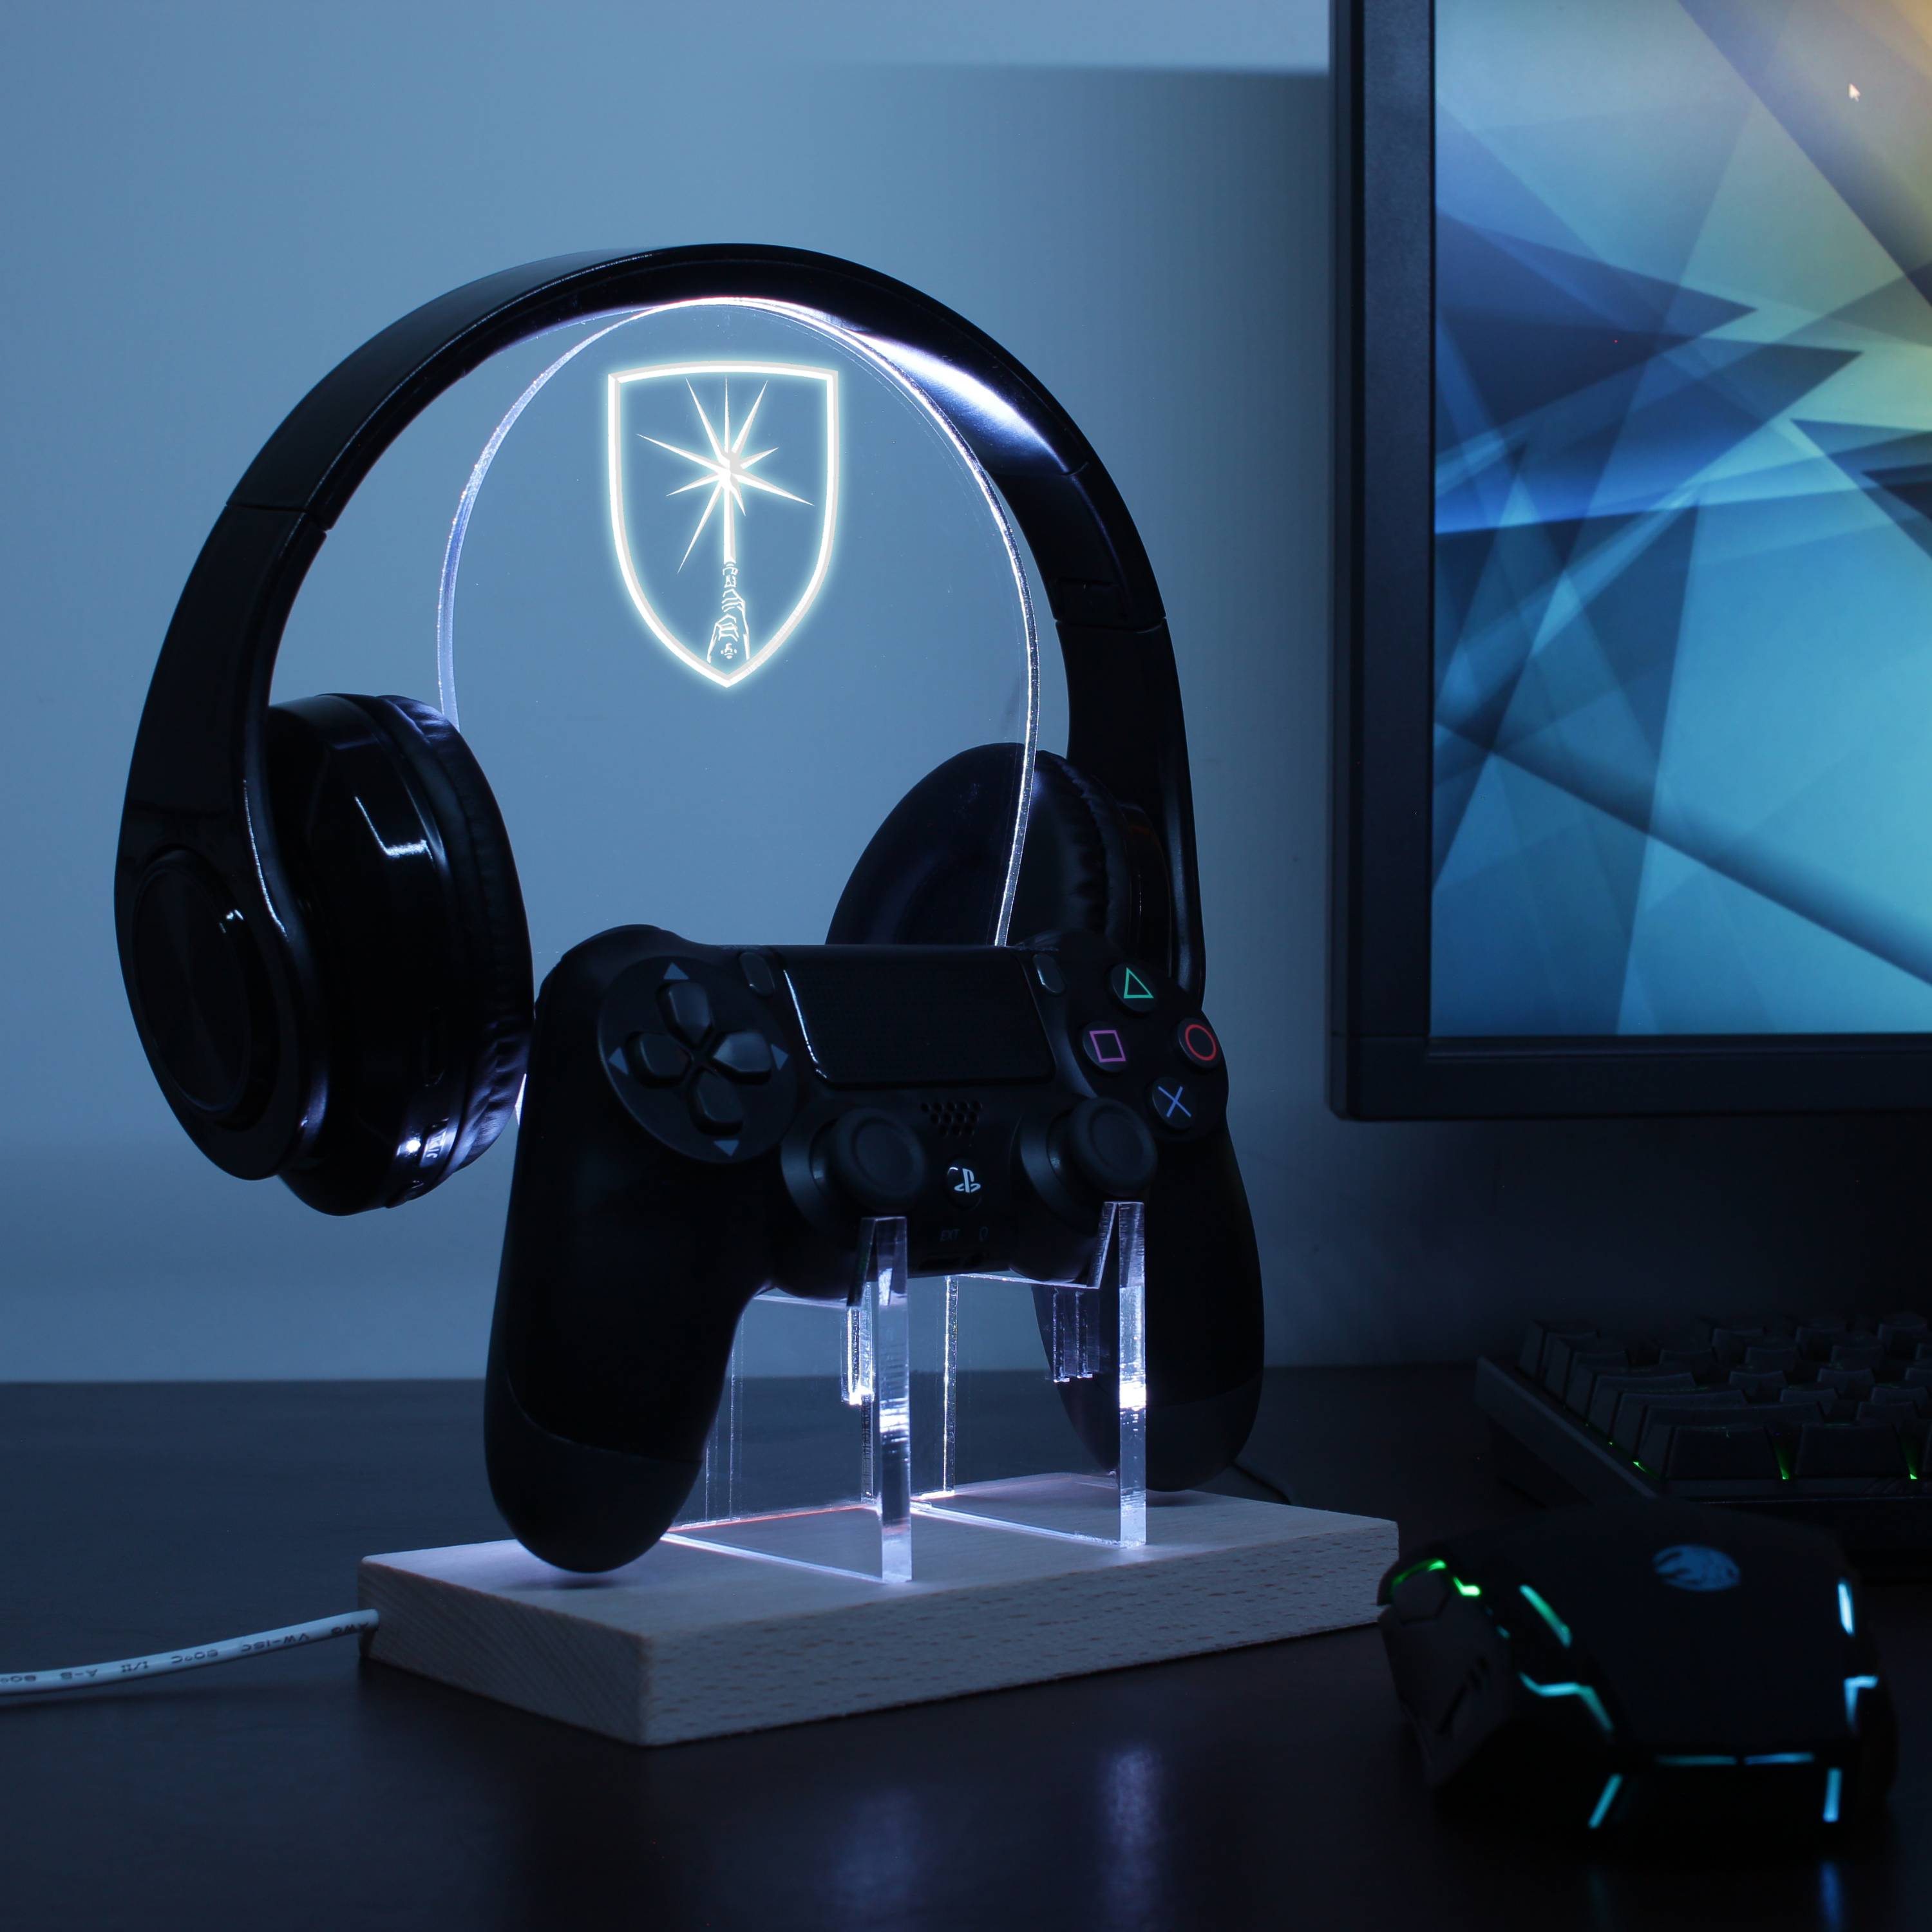 Star Wars Jedi LED Gaming Headset Controller Stand